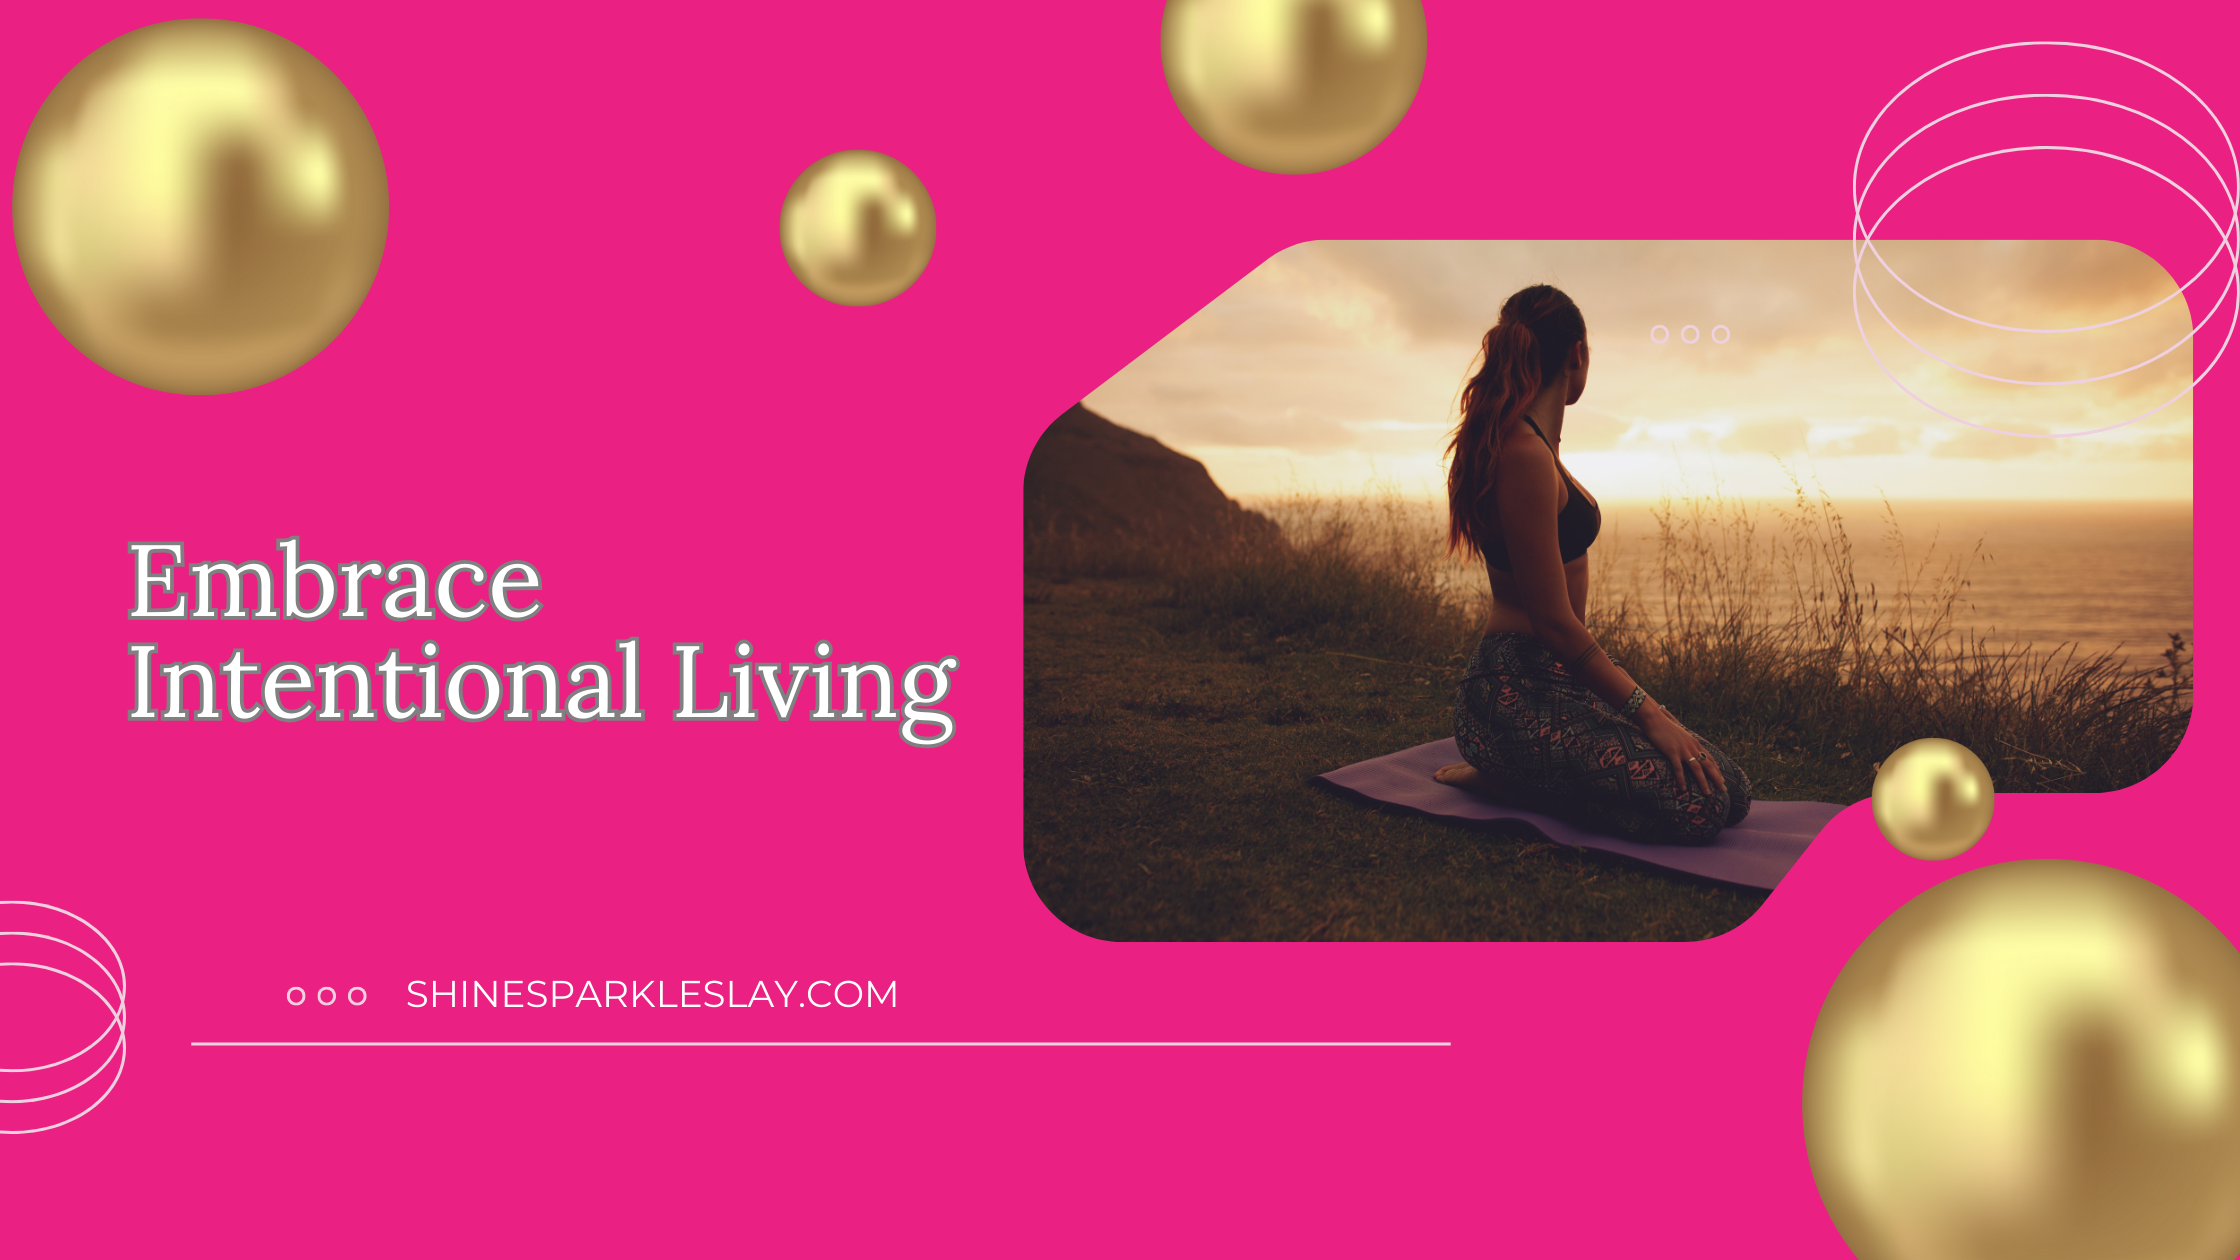 Embrace Intentional Living